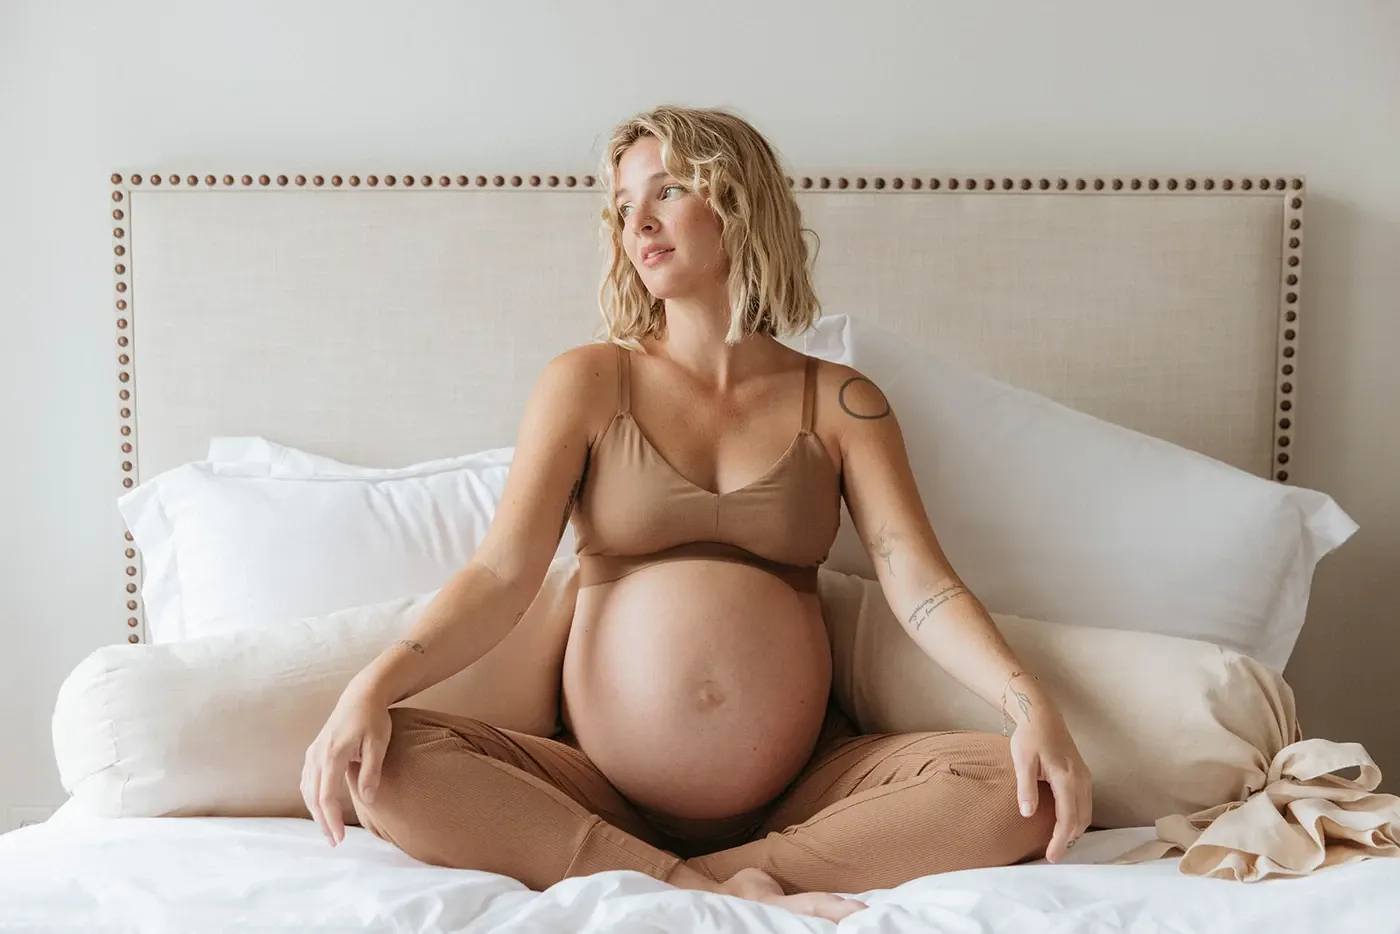 Best Christmas gifts for pregnant mums-to-be for 2022 UK